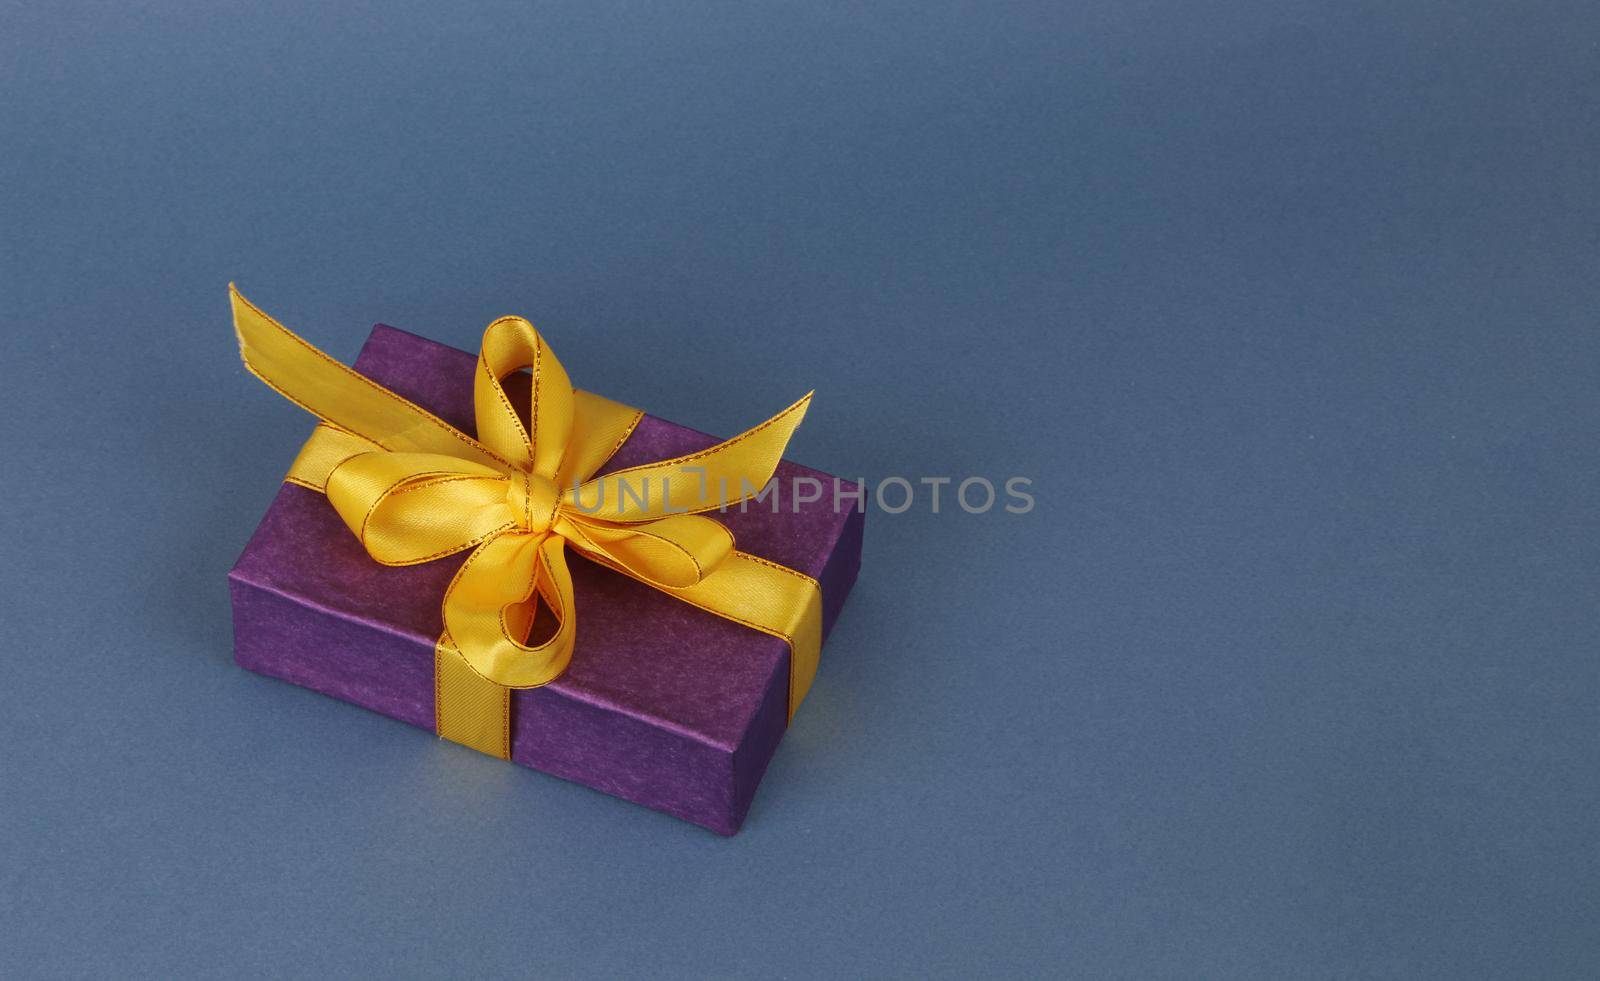 Dark blue paper box with yellow ribbon and bow on a light blue paper background.